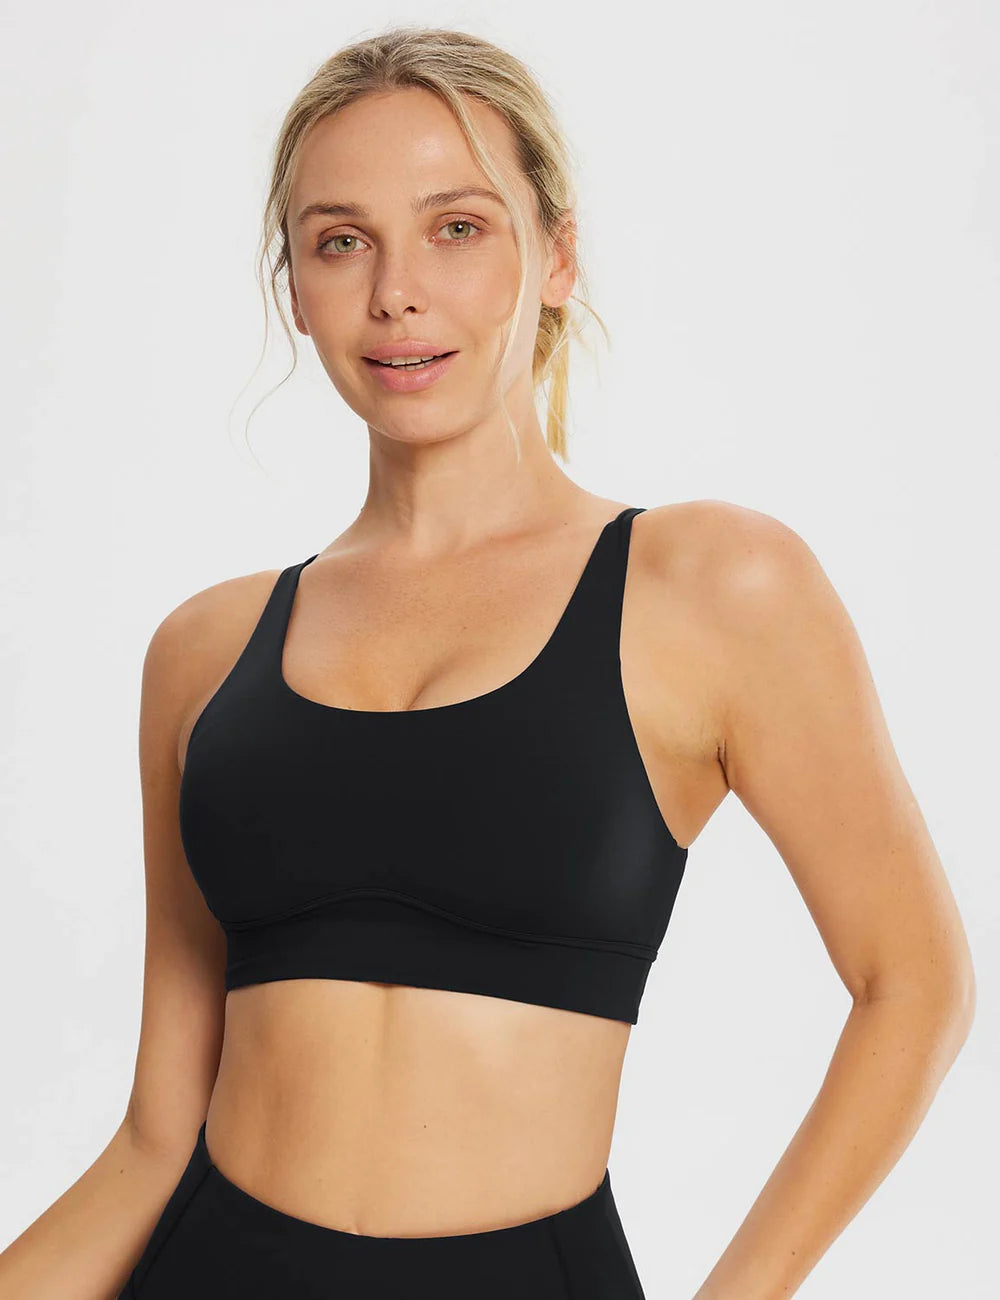 Instructive Advice: Can You Wear a Sports Bra as a Top?